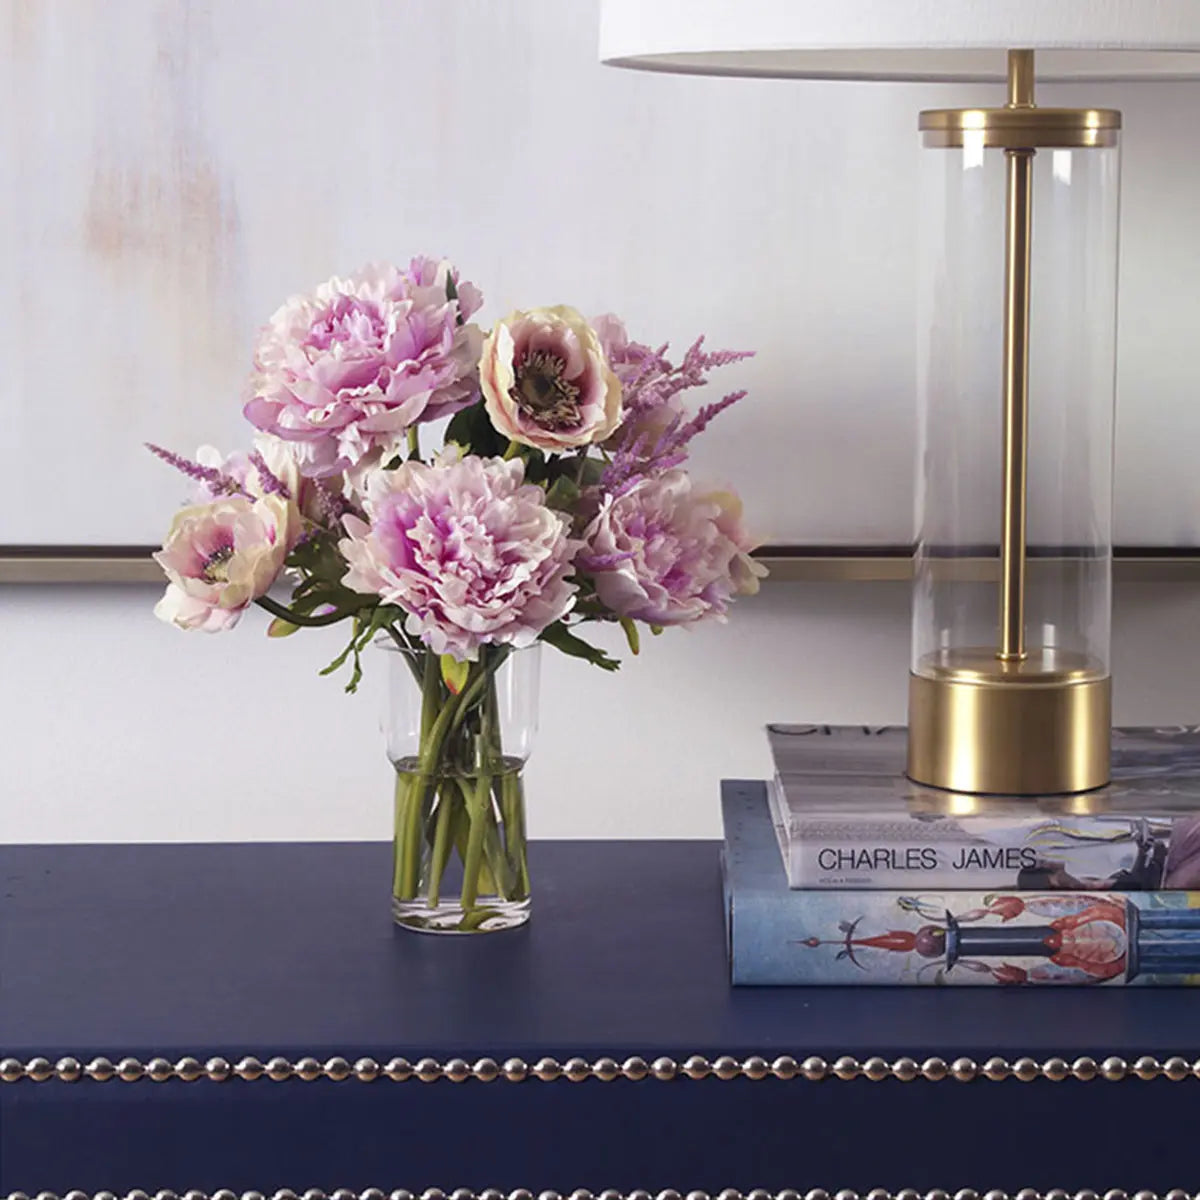 Diane James Pink Anemones and Peonies in Vase set on a navy blue console table by a lamp and books in a room